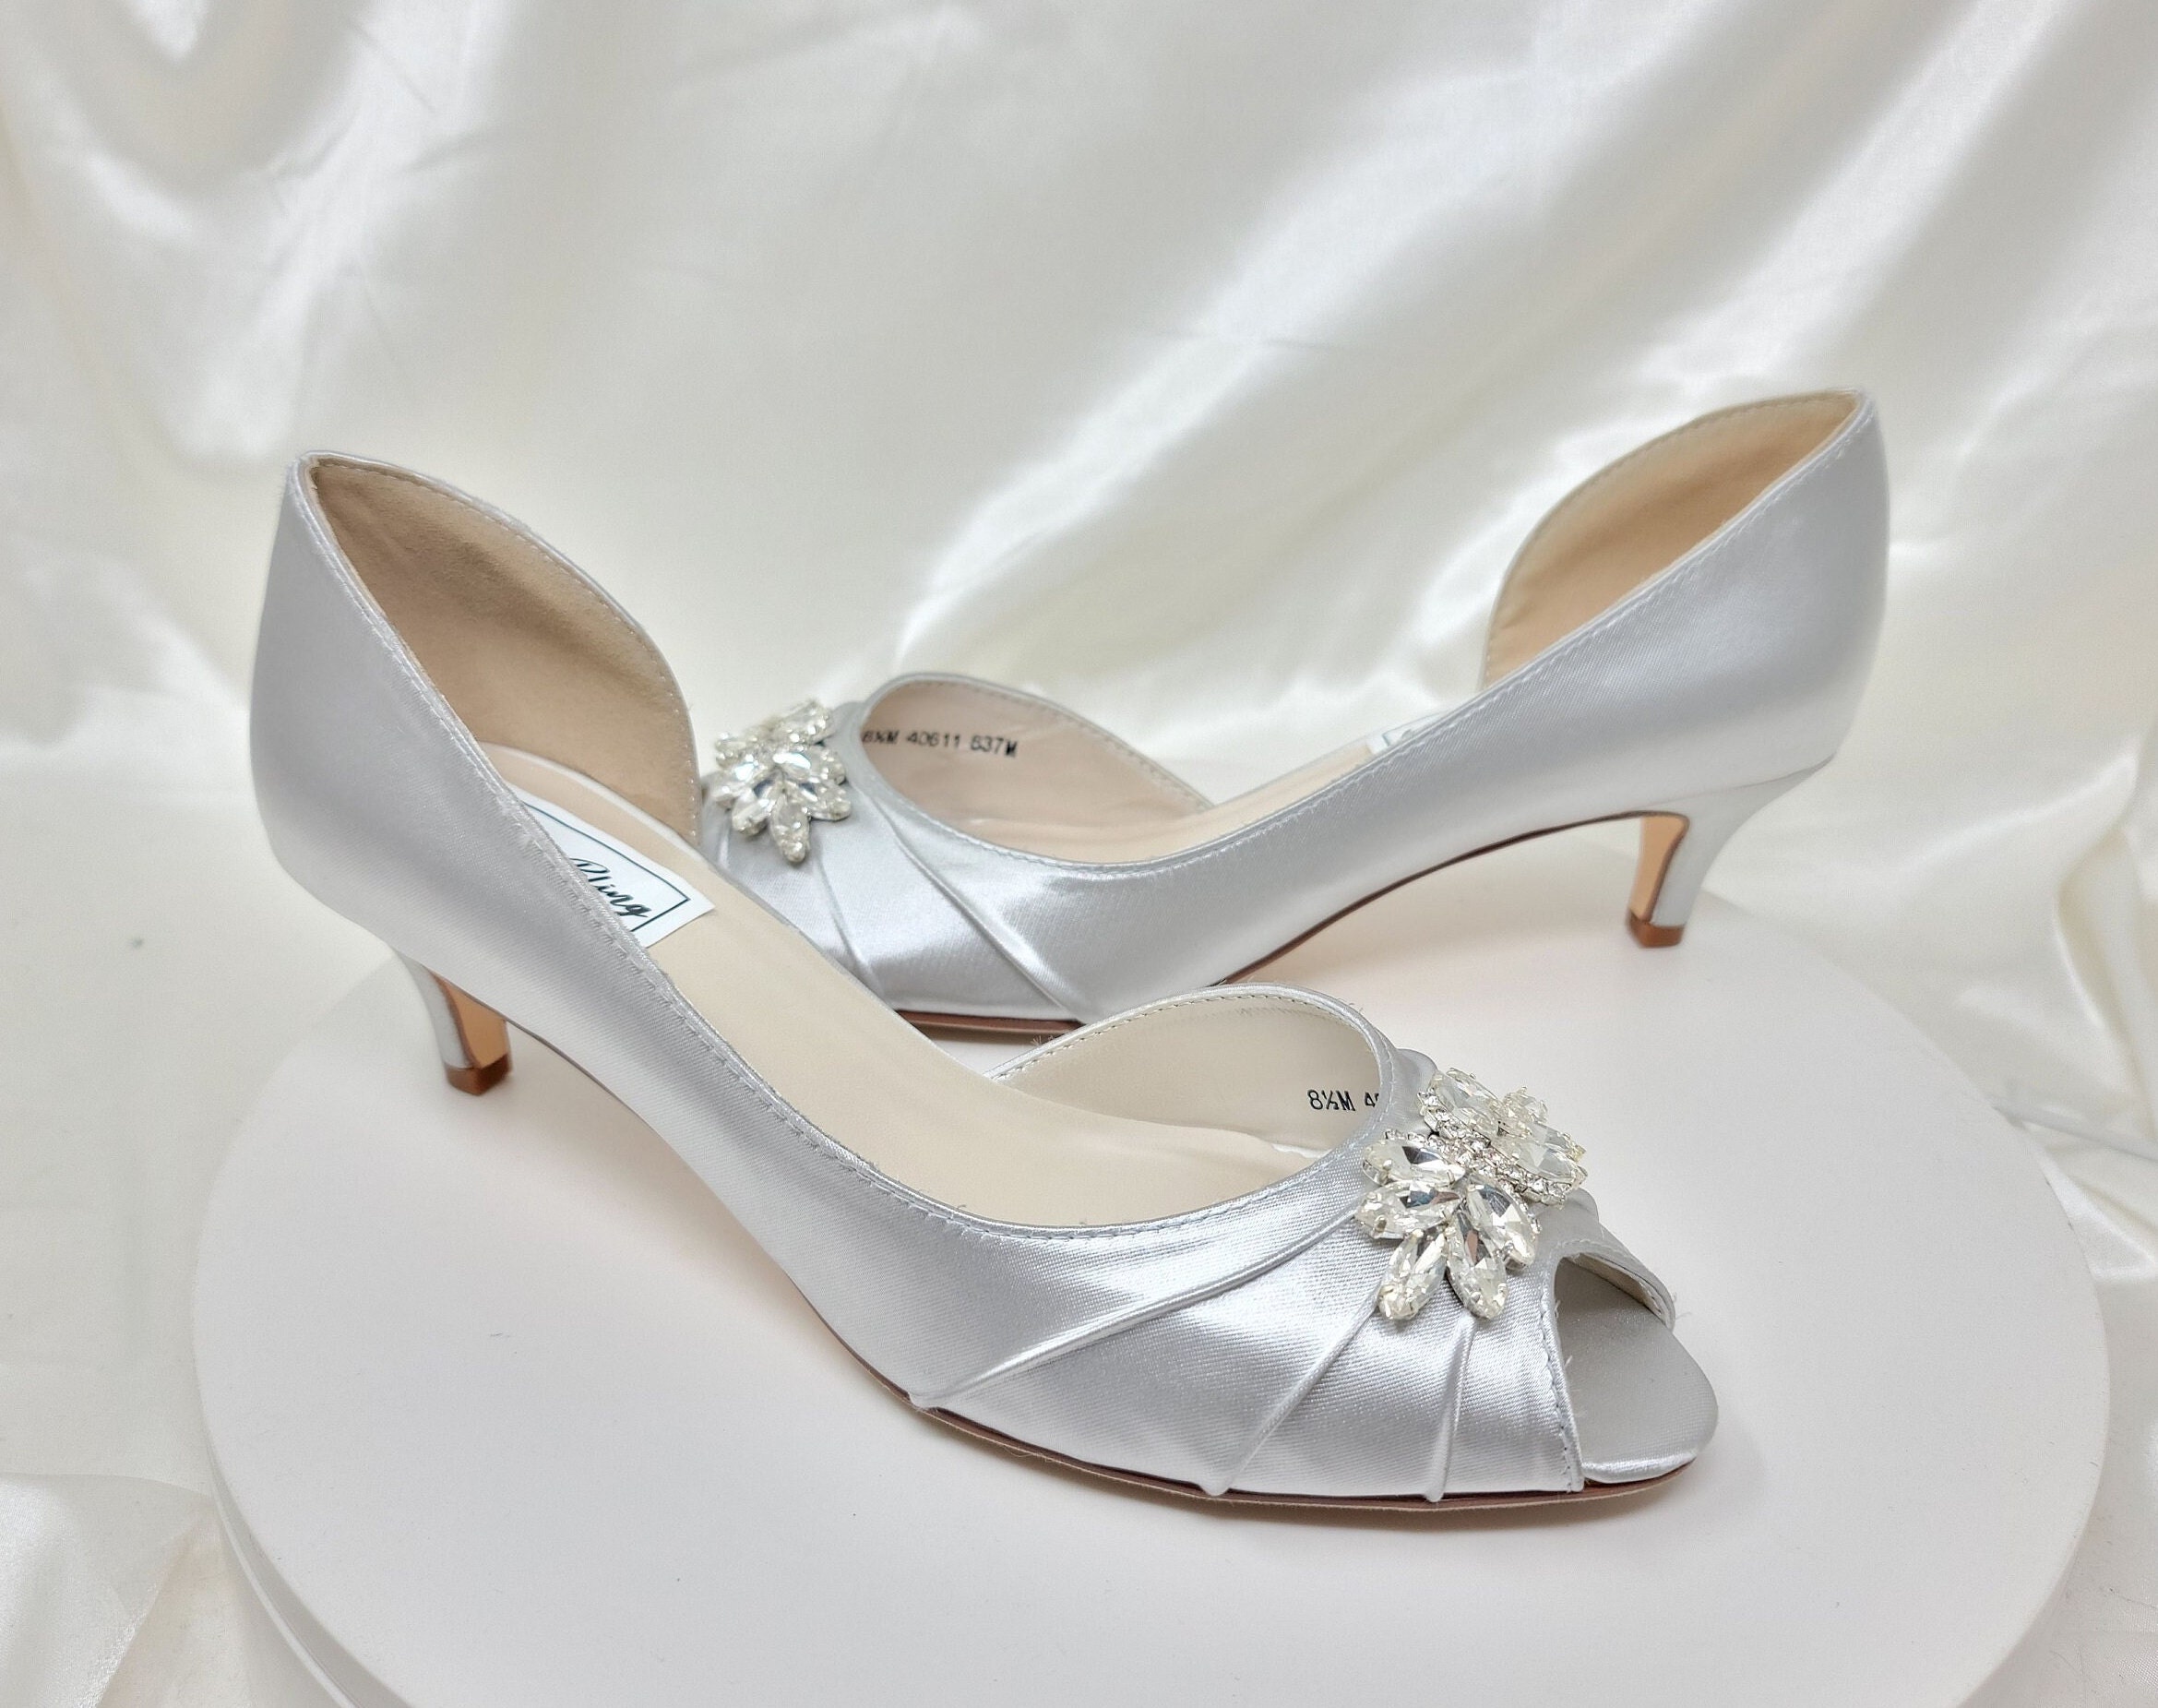 Fashion Women Pointed Toe Bling Crystal Pumps Wedding Kitten Heels Party  Shoes | eBay